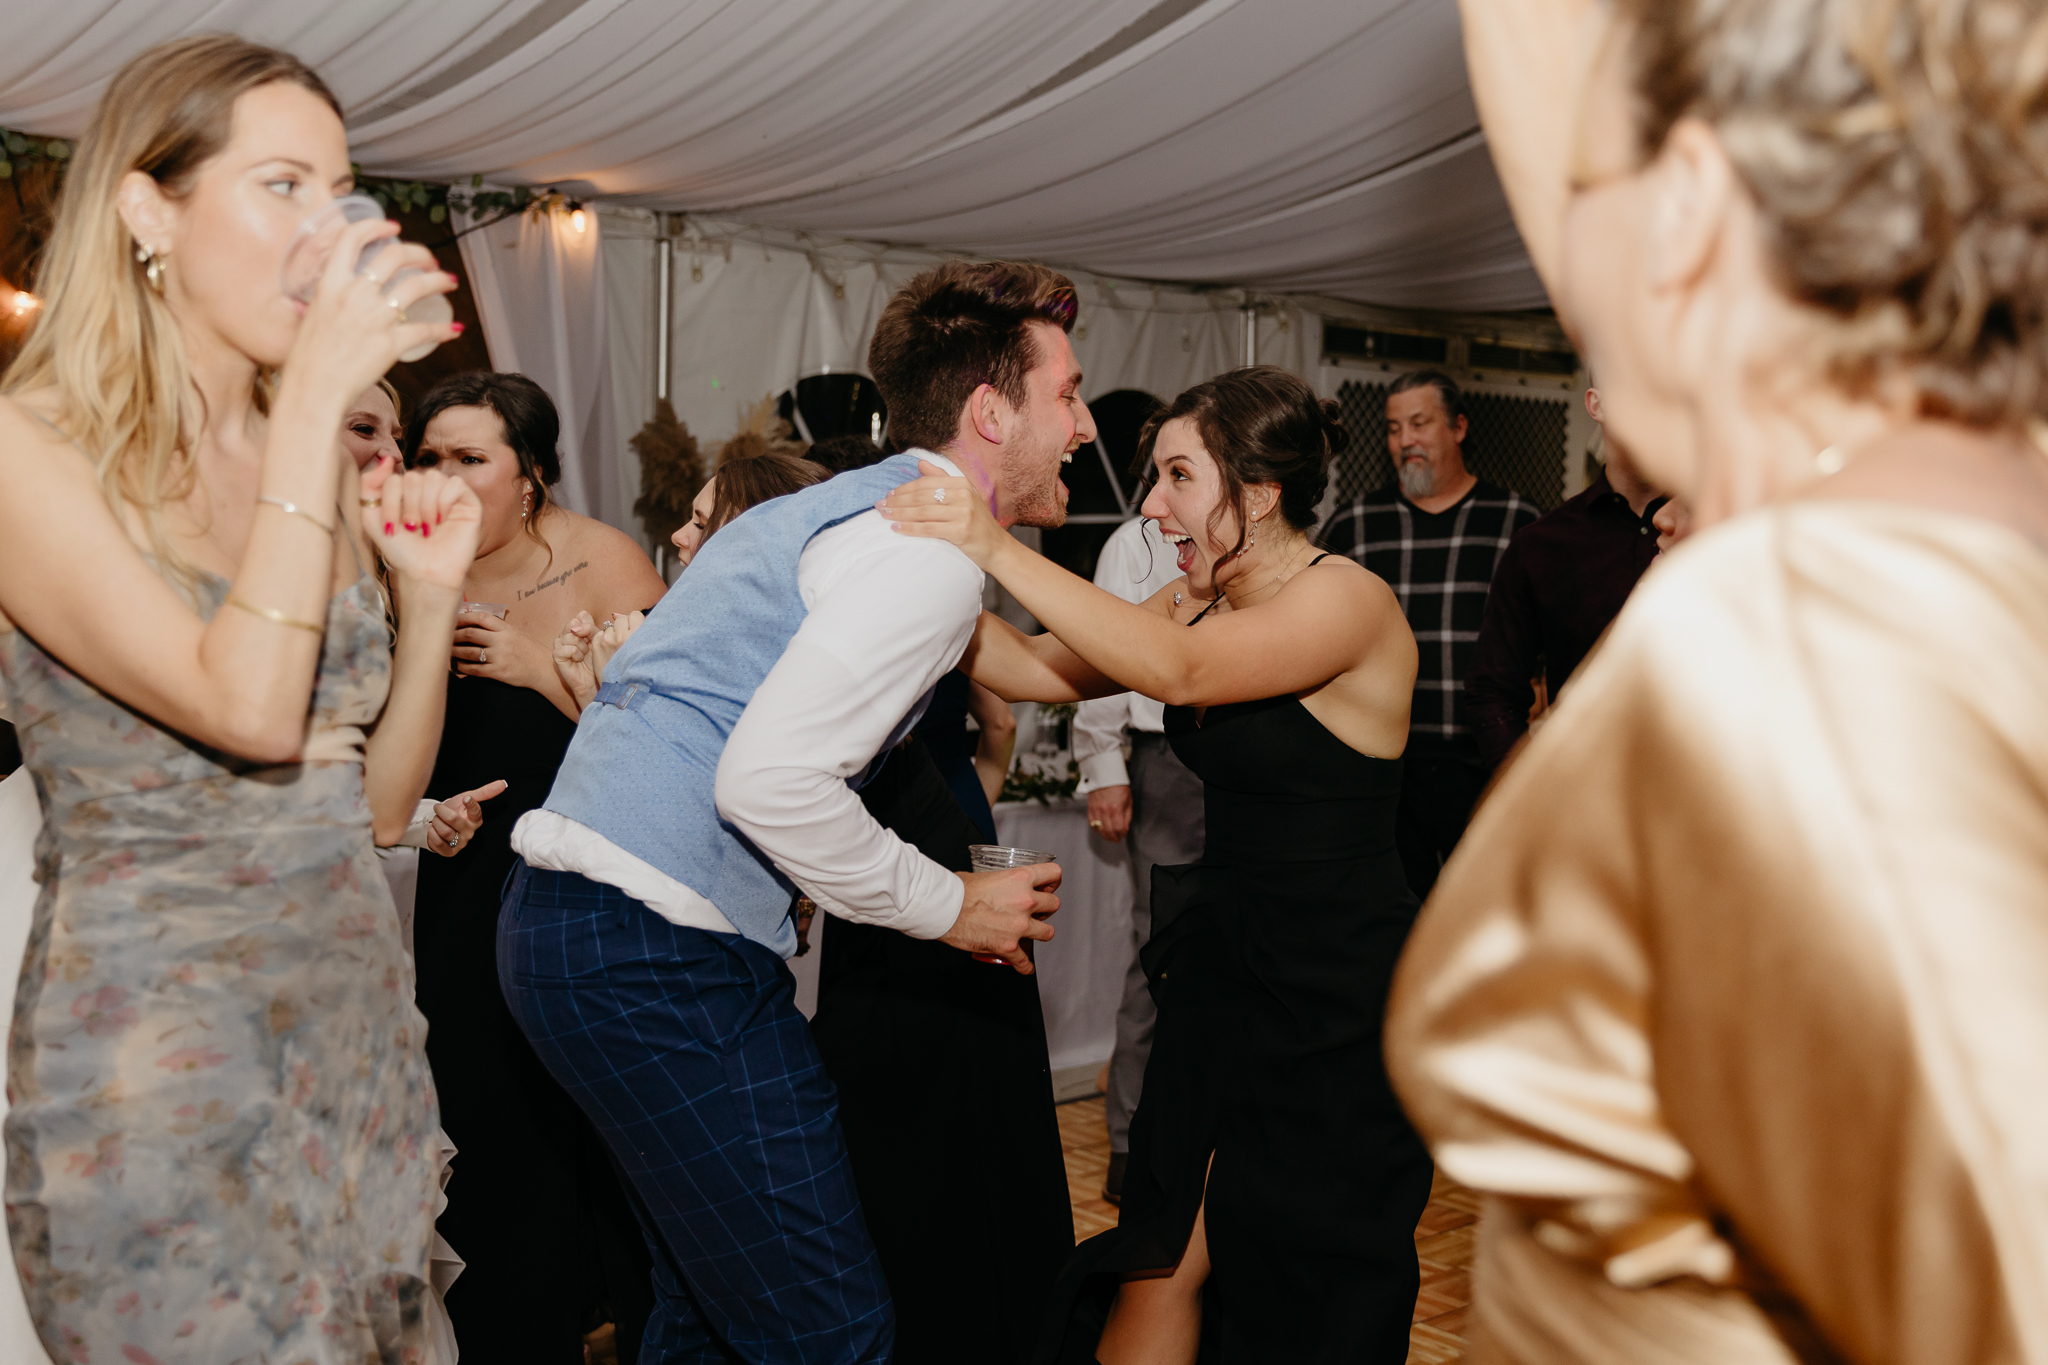 Wedding guests dancing on the dance floor together at a Chicago outdoor tent wedding reception